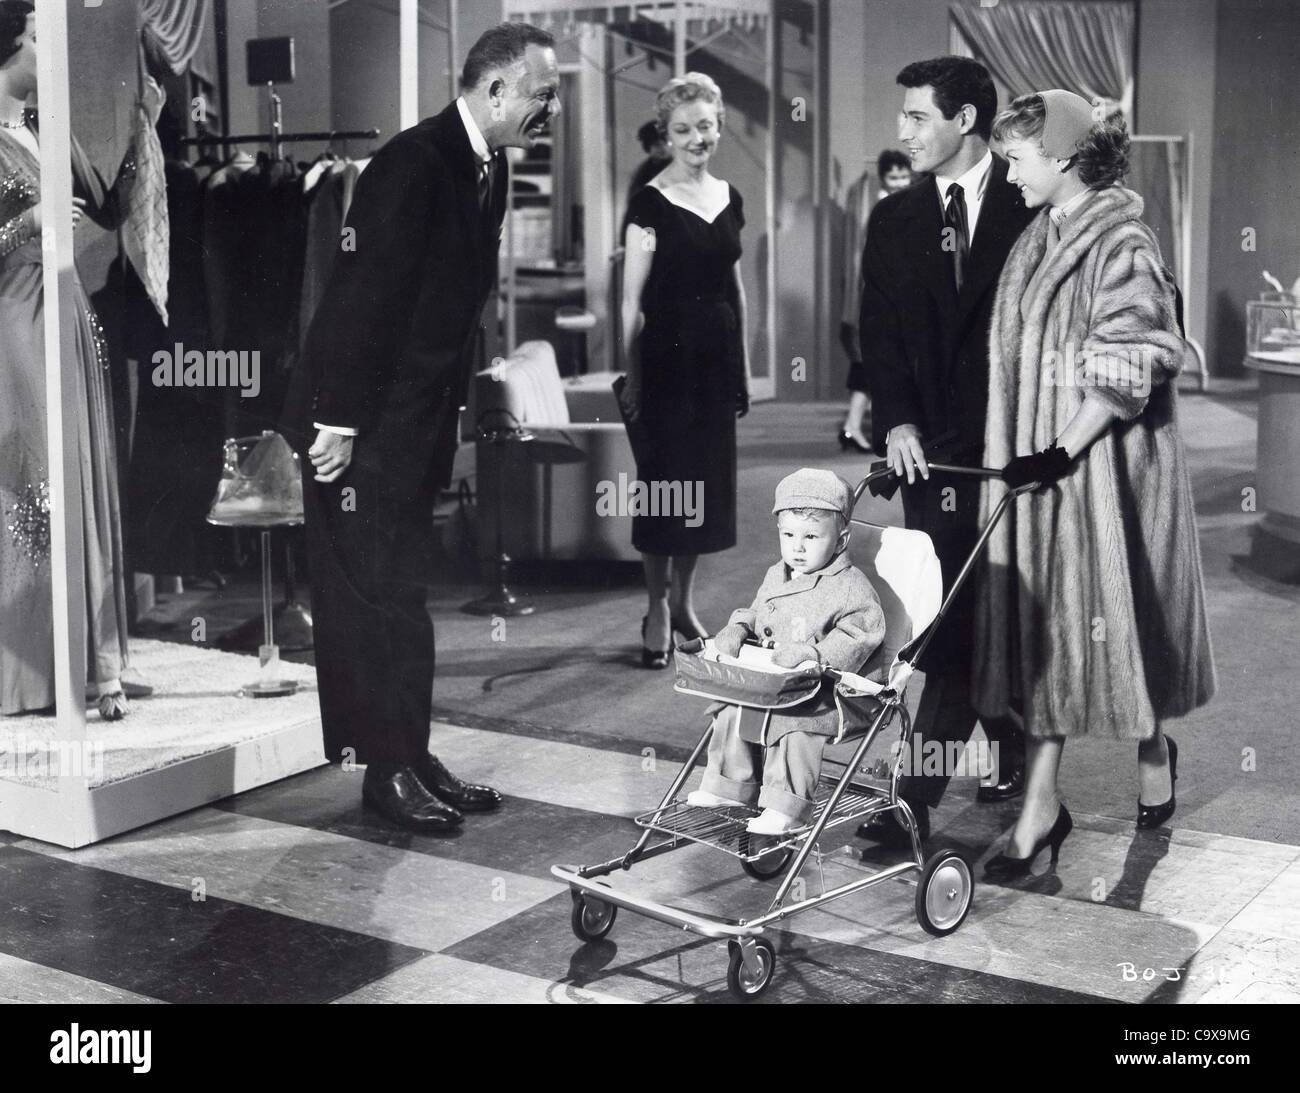 EDDIE FISHER with Debbie Reynolds , Bill Goodwin and baby Donald Gray.Bundle of Joy.Supplied by   Photos, inc.(Credit Image: Â© Supplied By Globe Photos, Inc/Globe Photos/ZUMAPRESS.com) Stock Photo